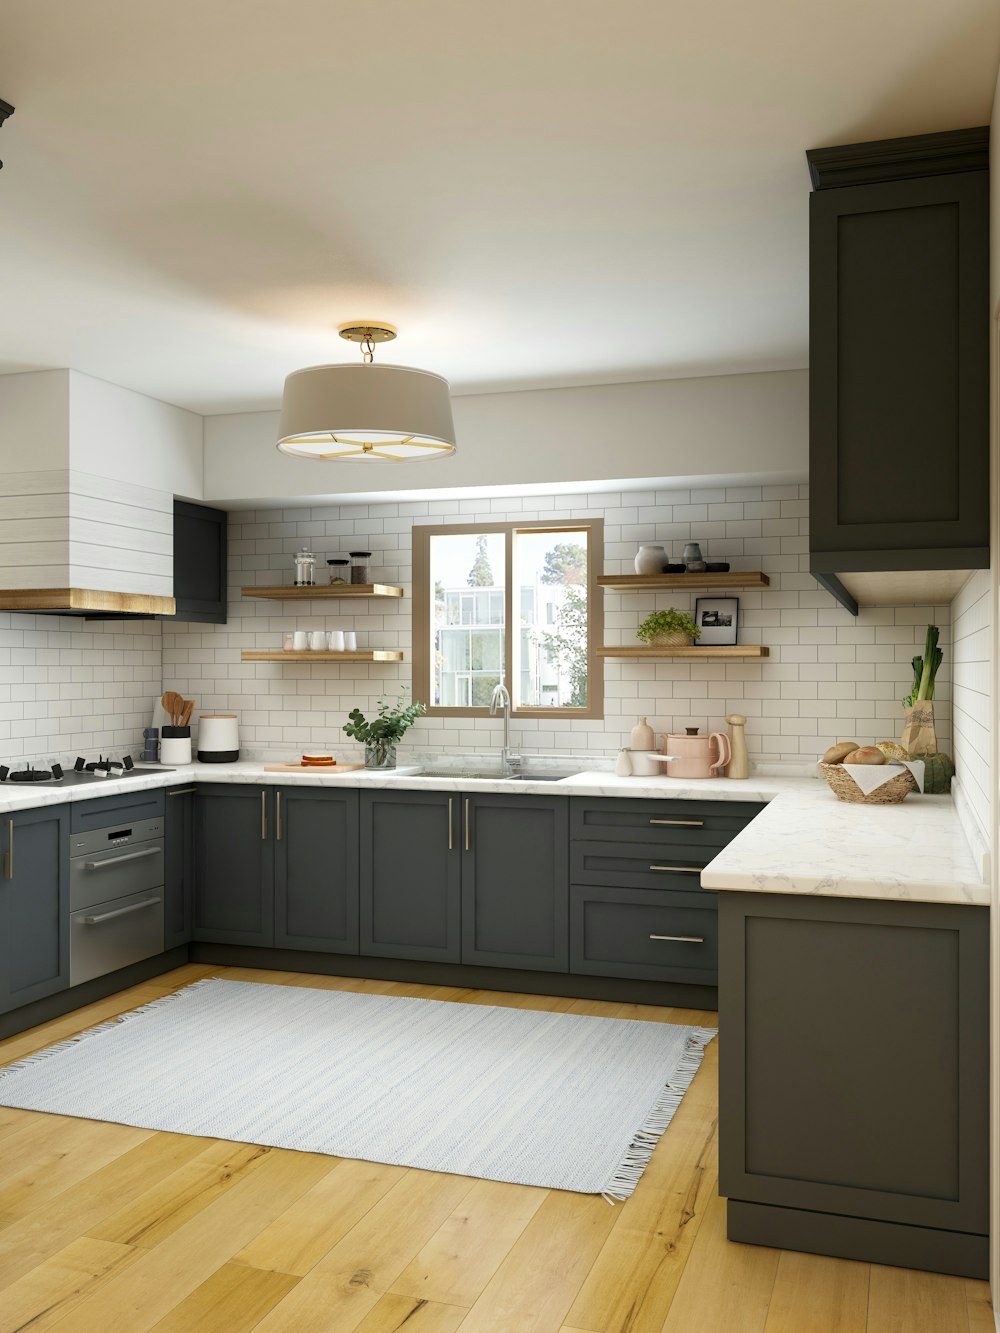 500 Kitchen Design Pictures, Kitchen Cabinets Pictures Gallery 2021